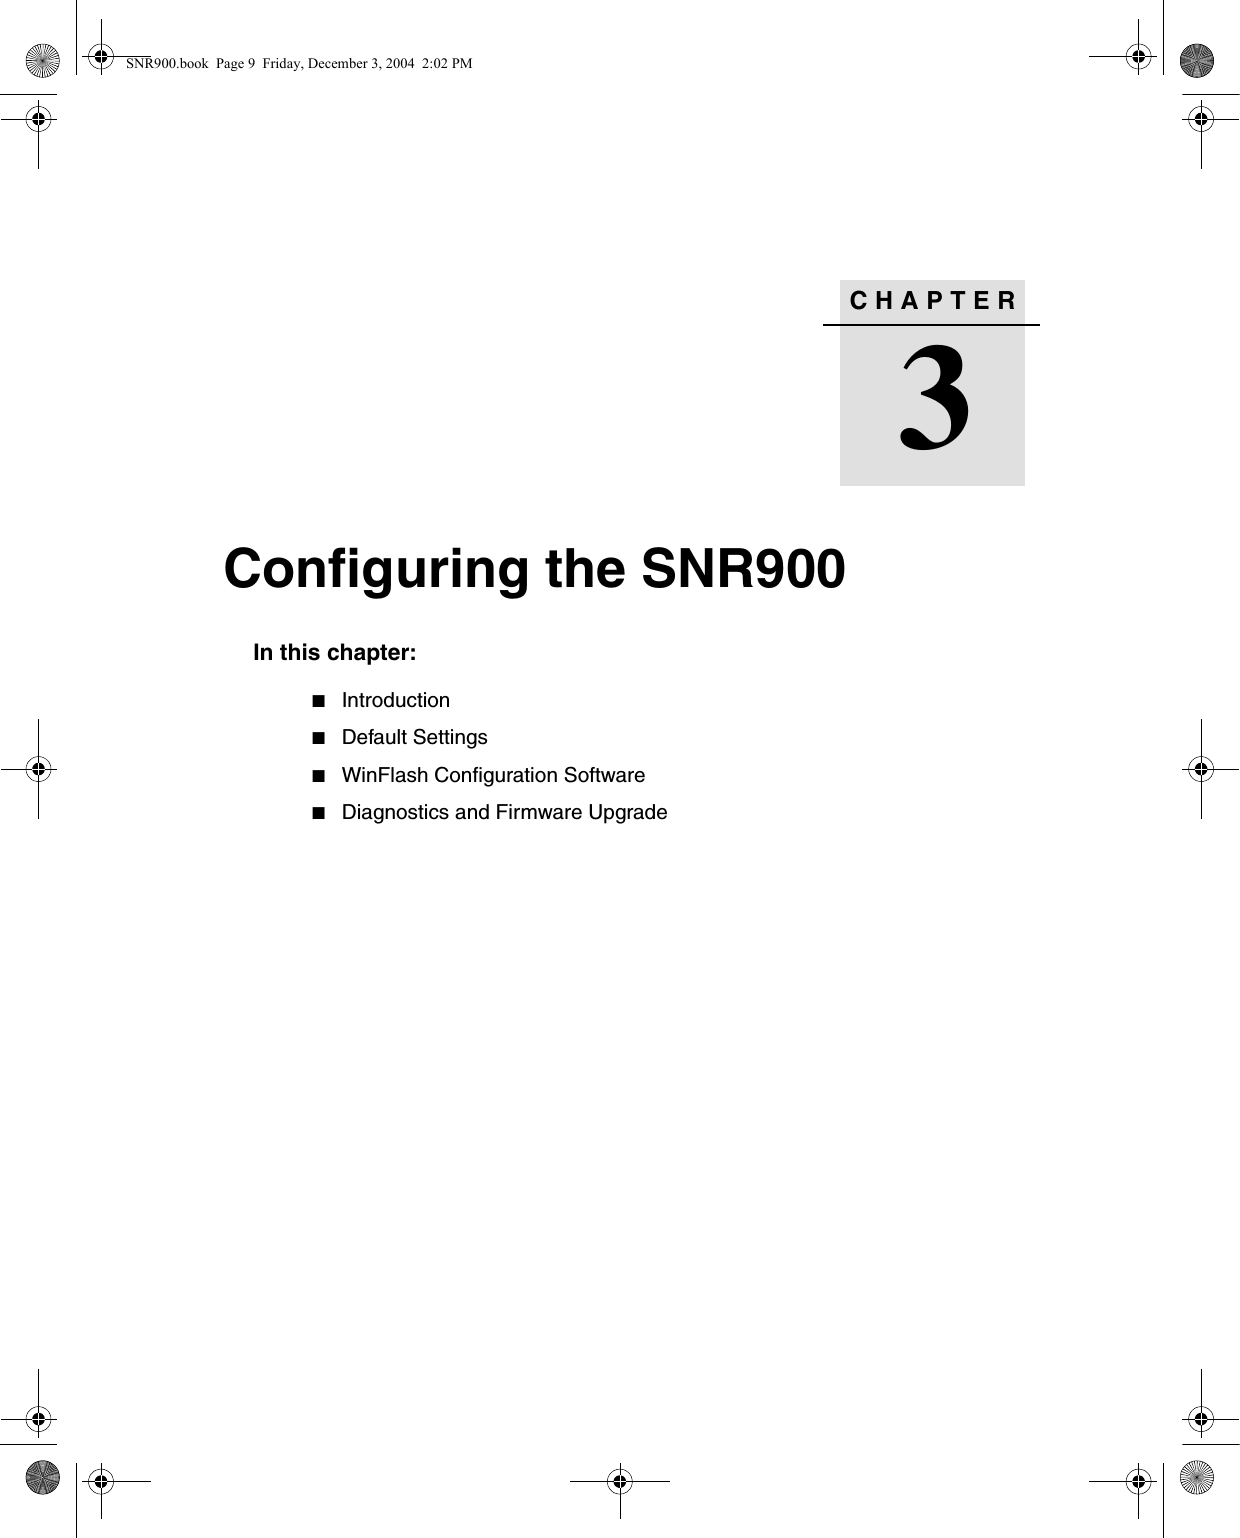 CHAPTER3Configuring the SNR900 3In this chapter:QIntroductionQDefault SettingsQWinFlash Configuration SoftwareQDiagnostics and Firmware UpgradeSNR900.book  Page 9  Friday, December 3, 2004  2:02 PM